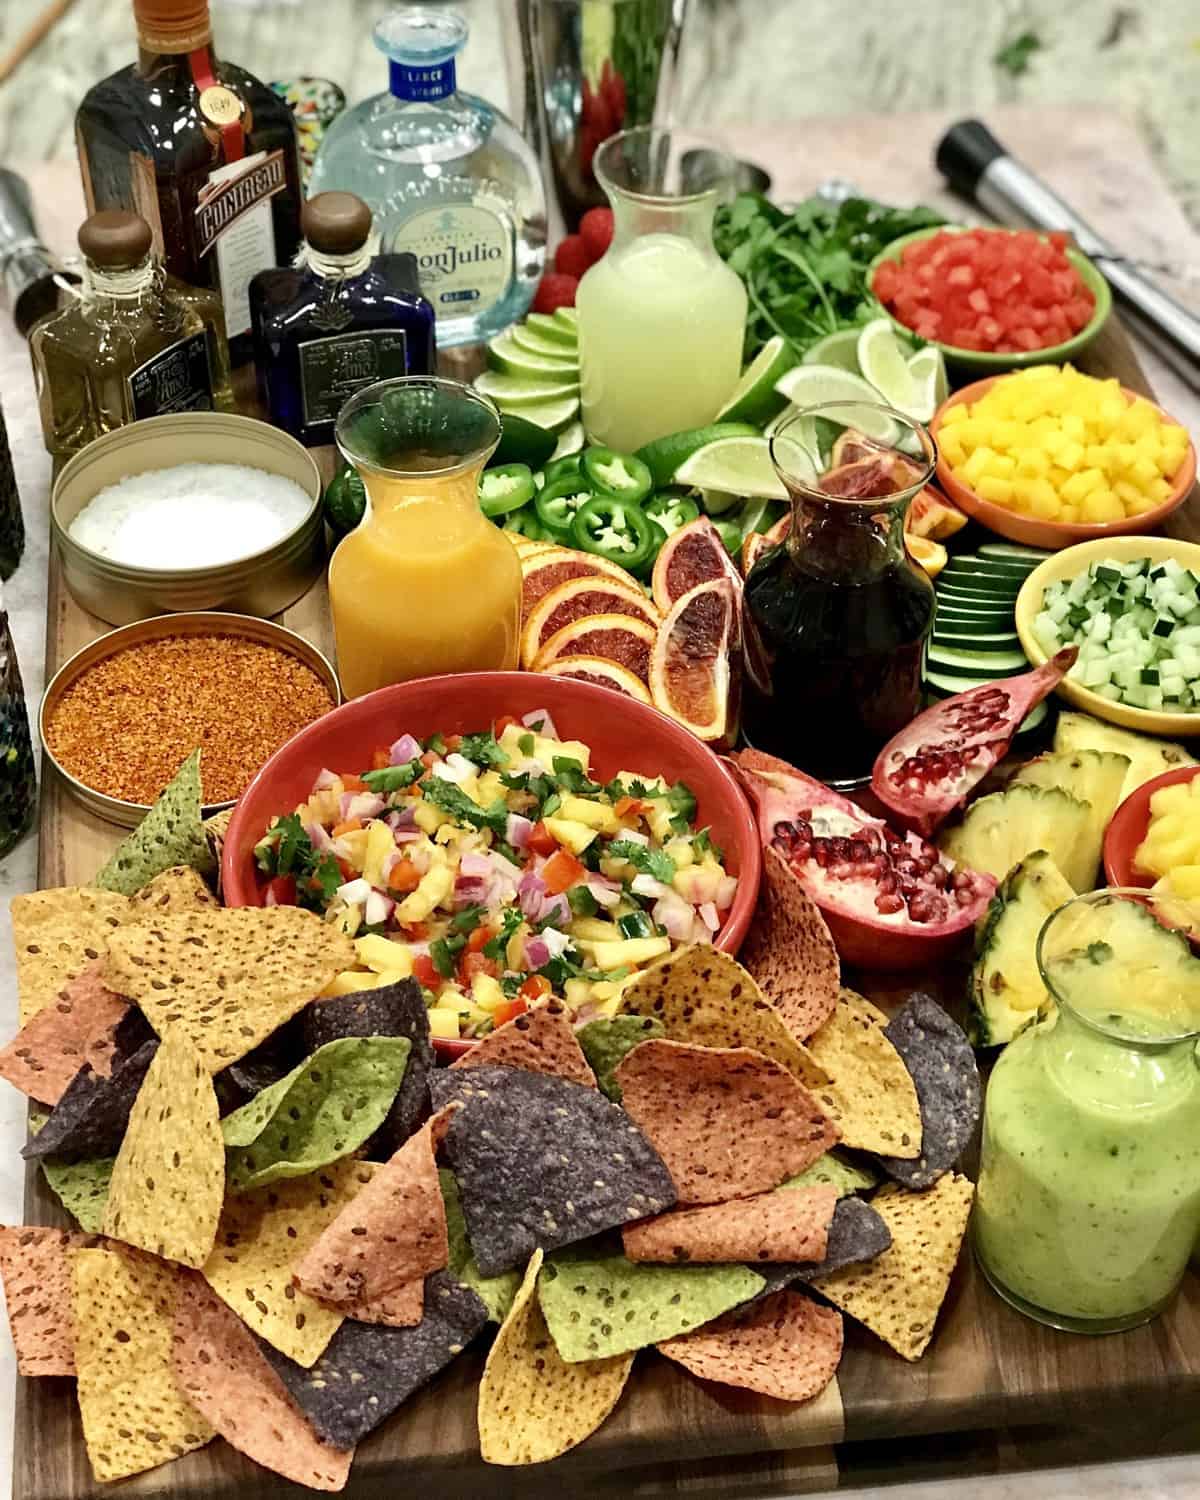 Make-Your-Own Margarita Board by The BakerMama